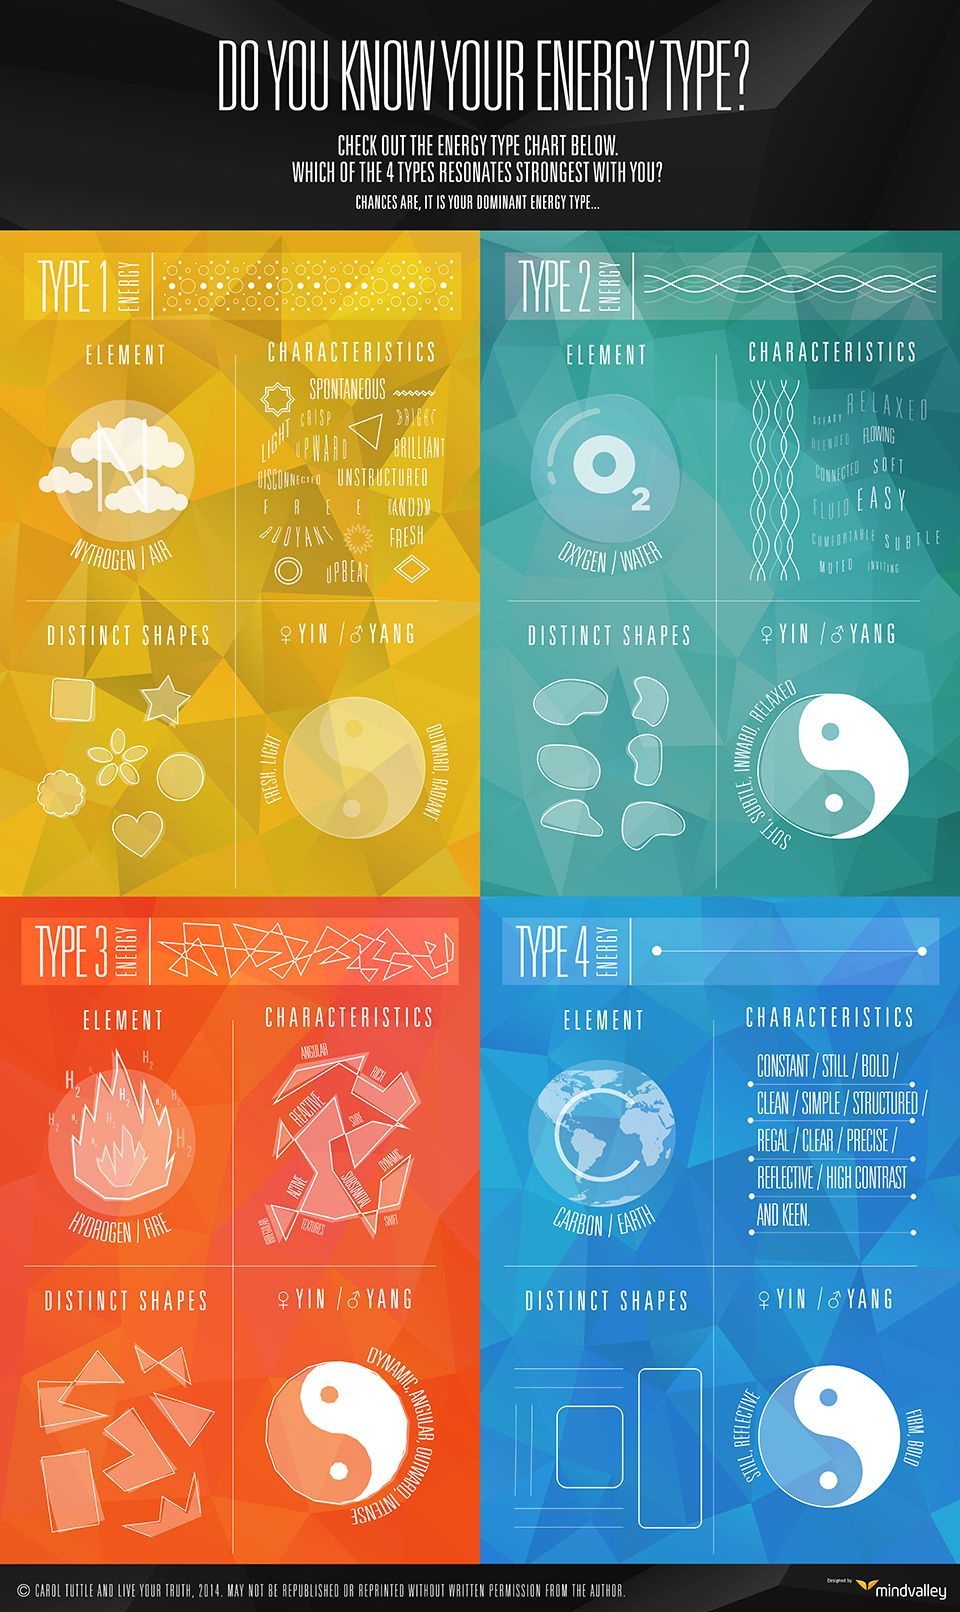 Do You Know Your Energy Type? I love Carol Tuttles work in this area. Image from her course from the Mindvalley Academy.